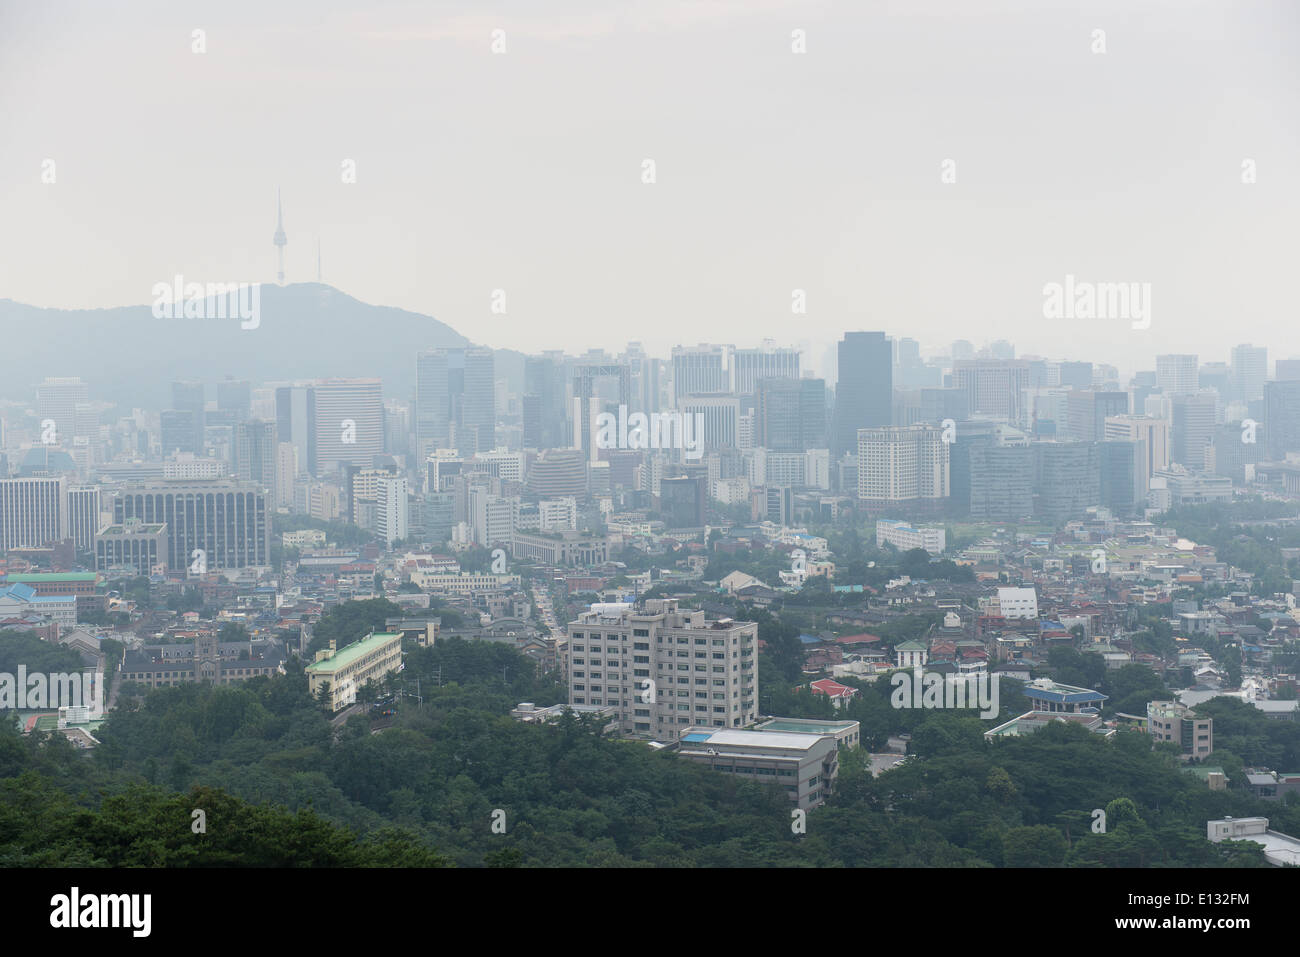 Cityscape of Seoul on a foggy day with skyscrapers and forest Stock Photo